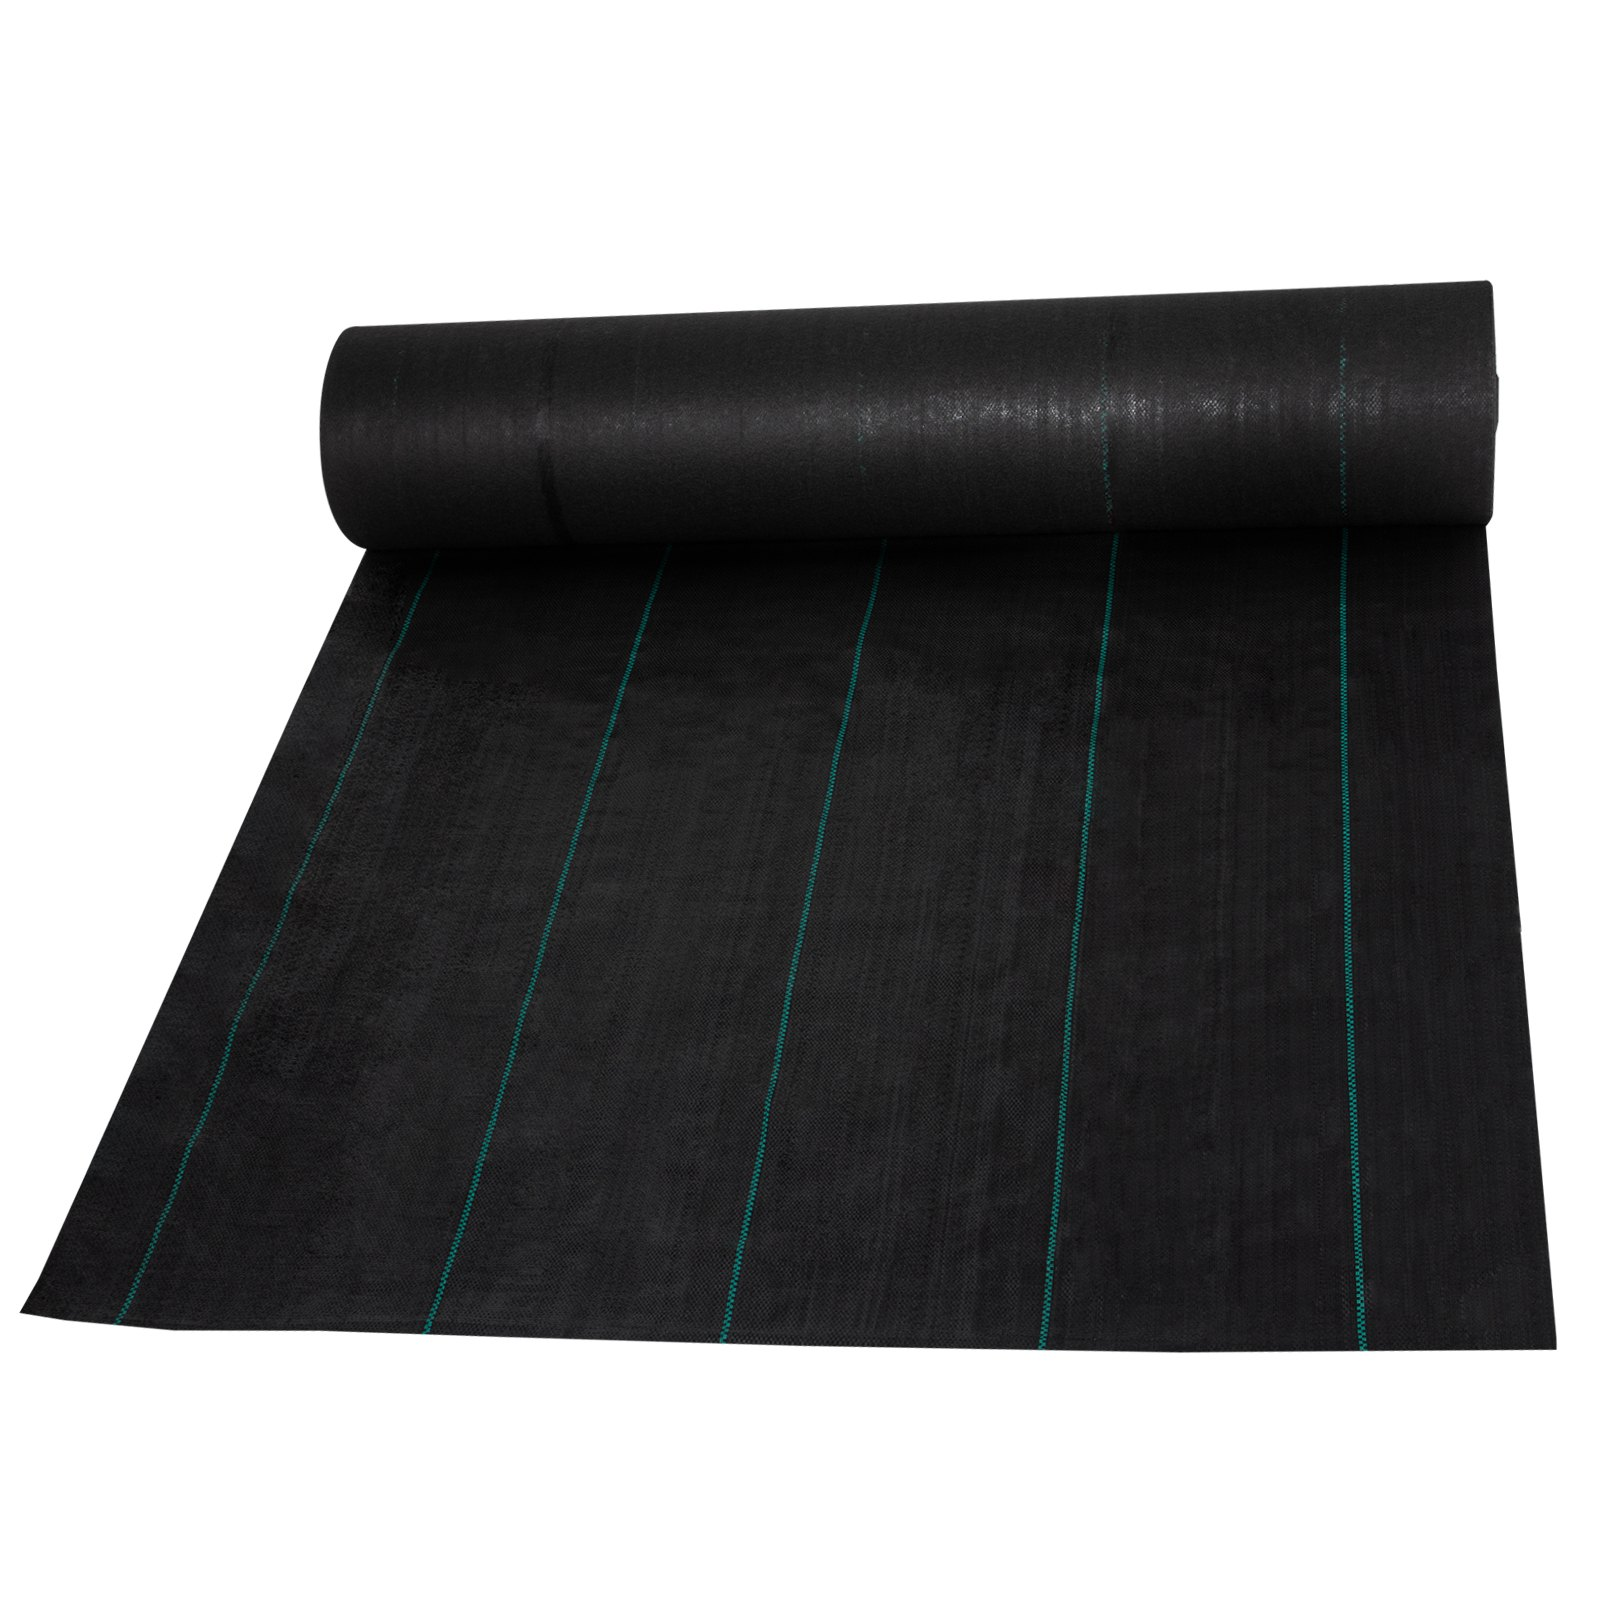 VEVOR Weed Barrier, 5.8oz Landscape Fabric, 3ft x 300ft Cover Mat Heavy Duty Woven Grass Control Geotextile for Garden, Patio, Black, Goodies N Stuff